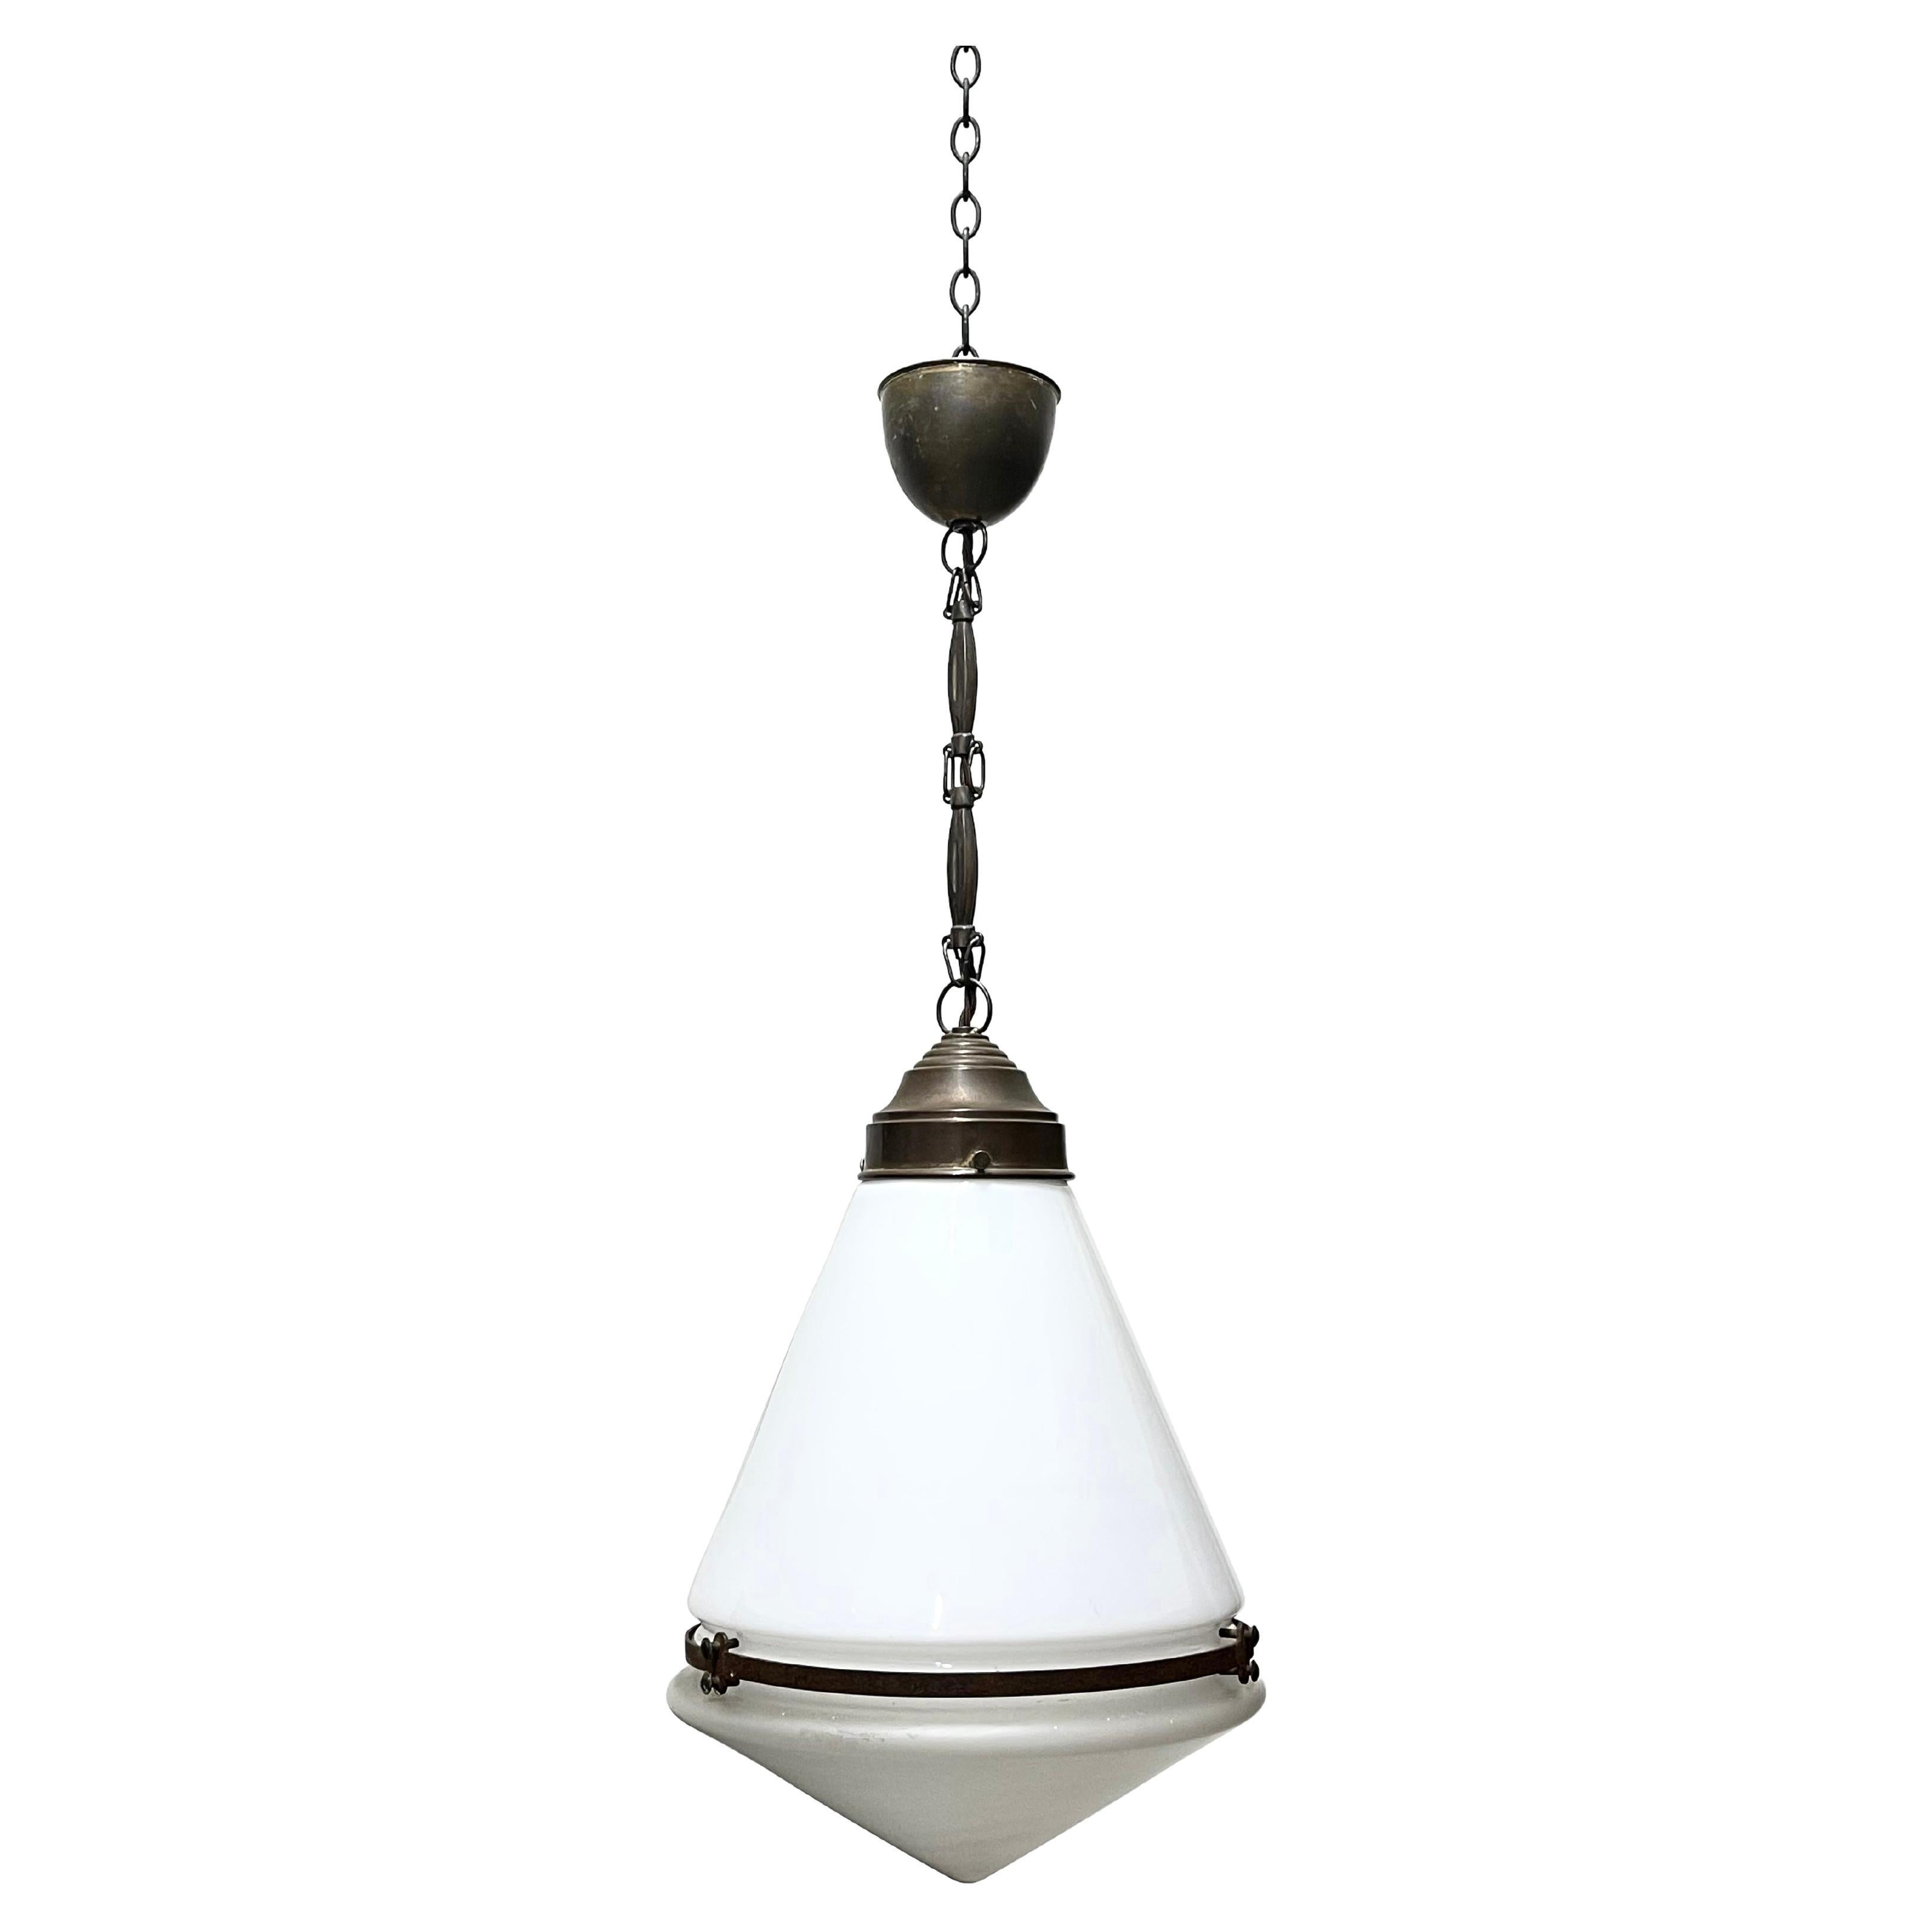 Antique Conical Opaline Milk Glass Ceiling Pendant Light by Peter Behrens For Sale